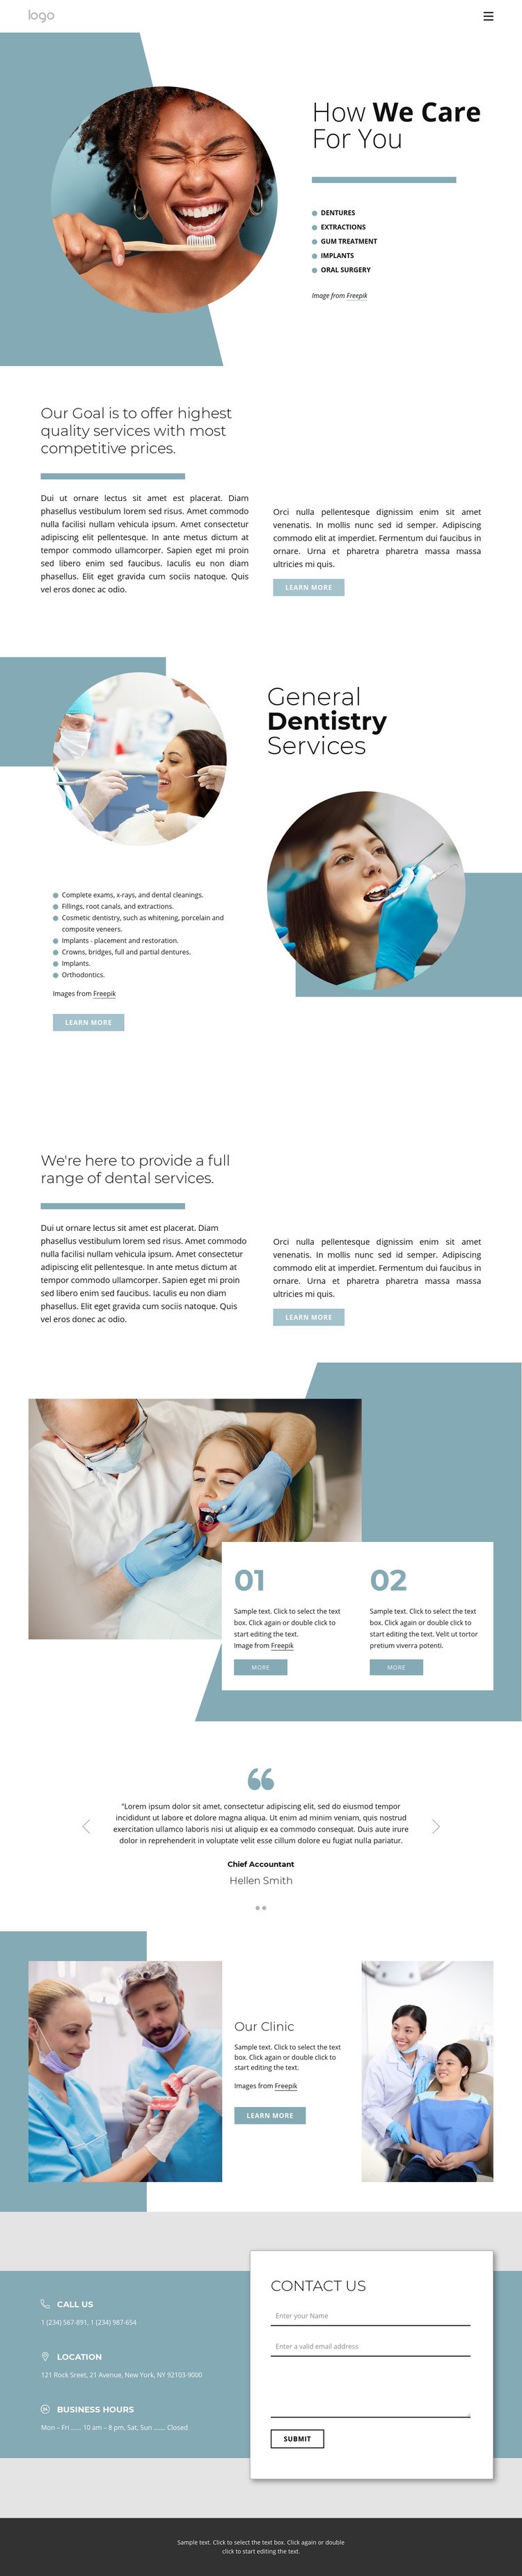 Hight quality dental services Homepage Design